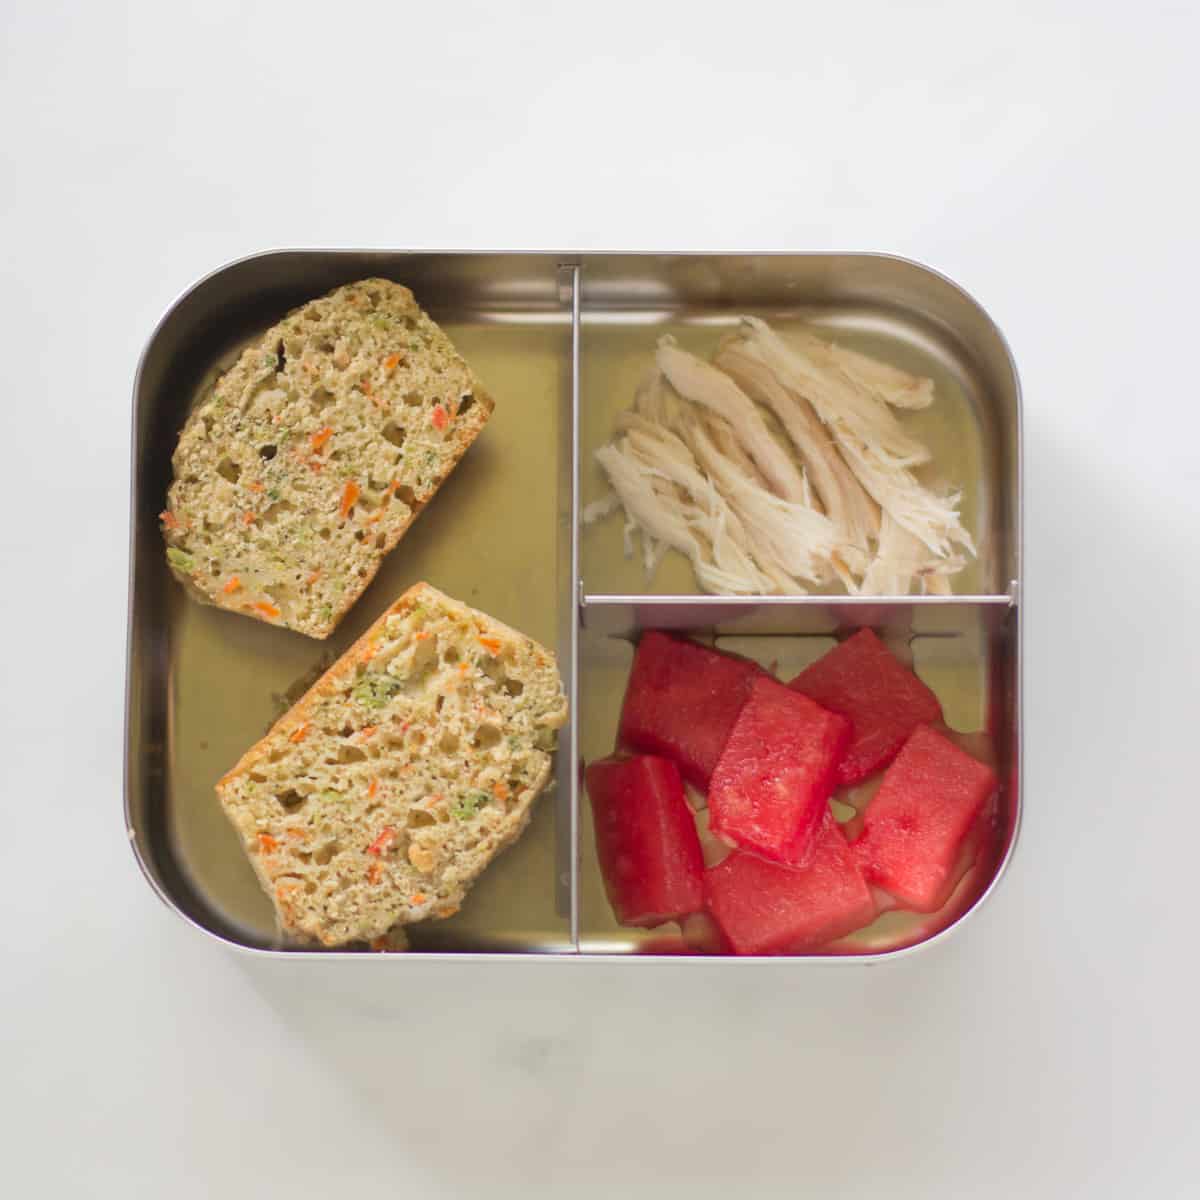 A sliced vegetable muffin in a school bento box with shredded chicken and watermelon.